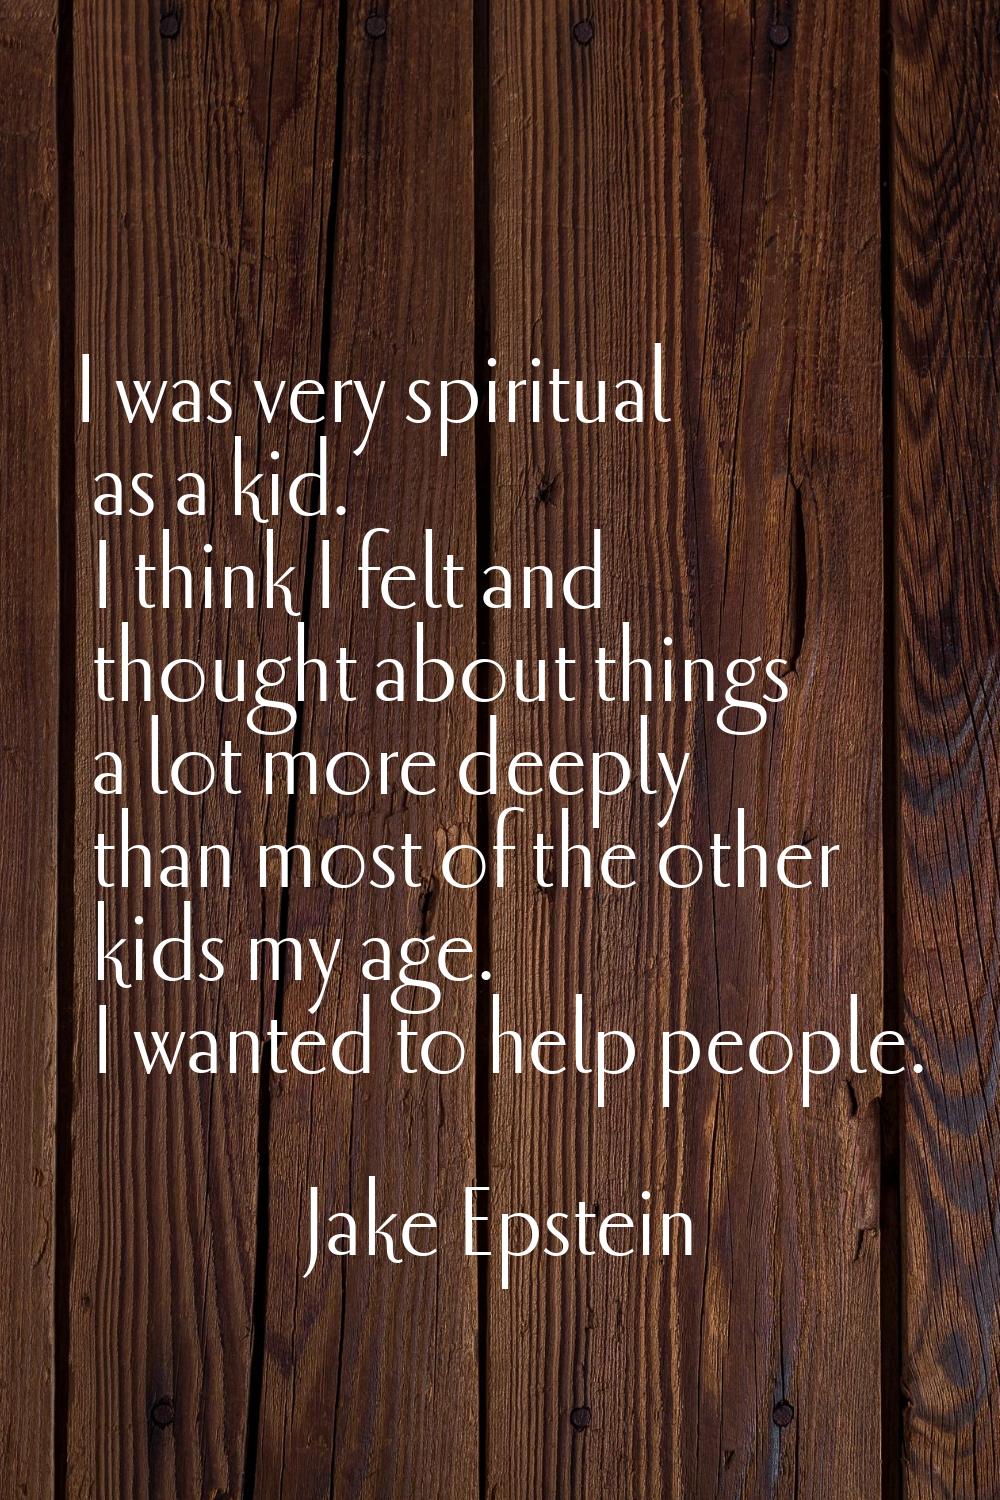 I was very spiritual as a kid. I think I felt and thought about things a lot more deeply than most 